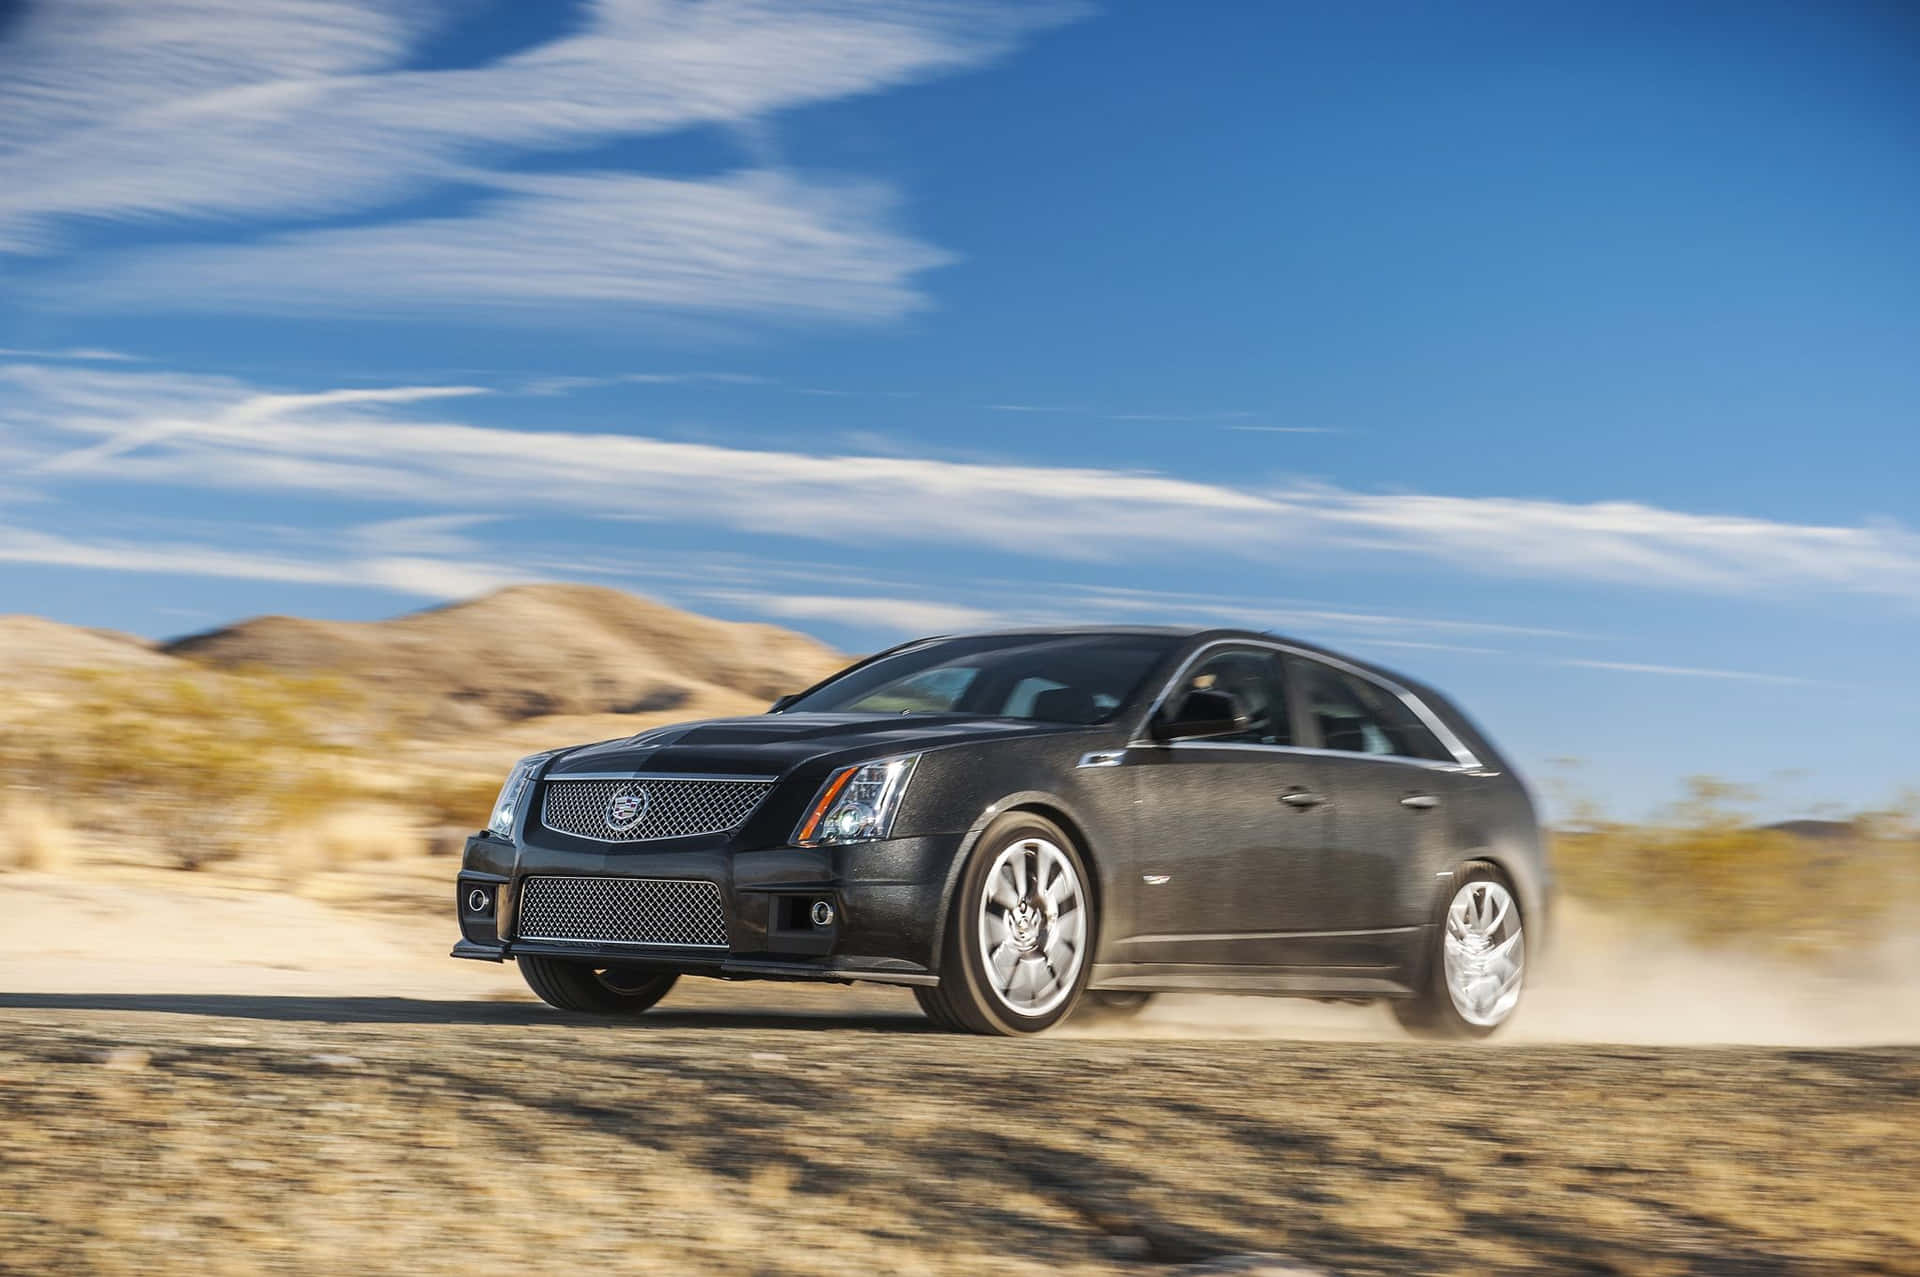 Sleek and Stylish Cadillac CTS on the Road Wallpaper